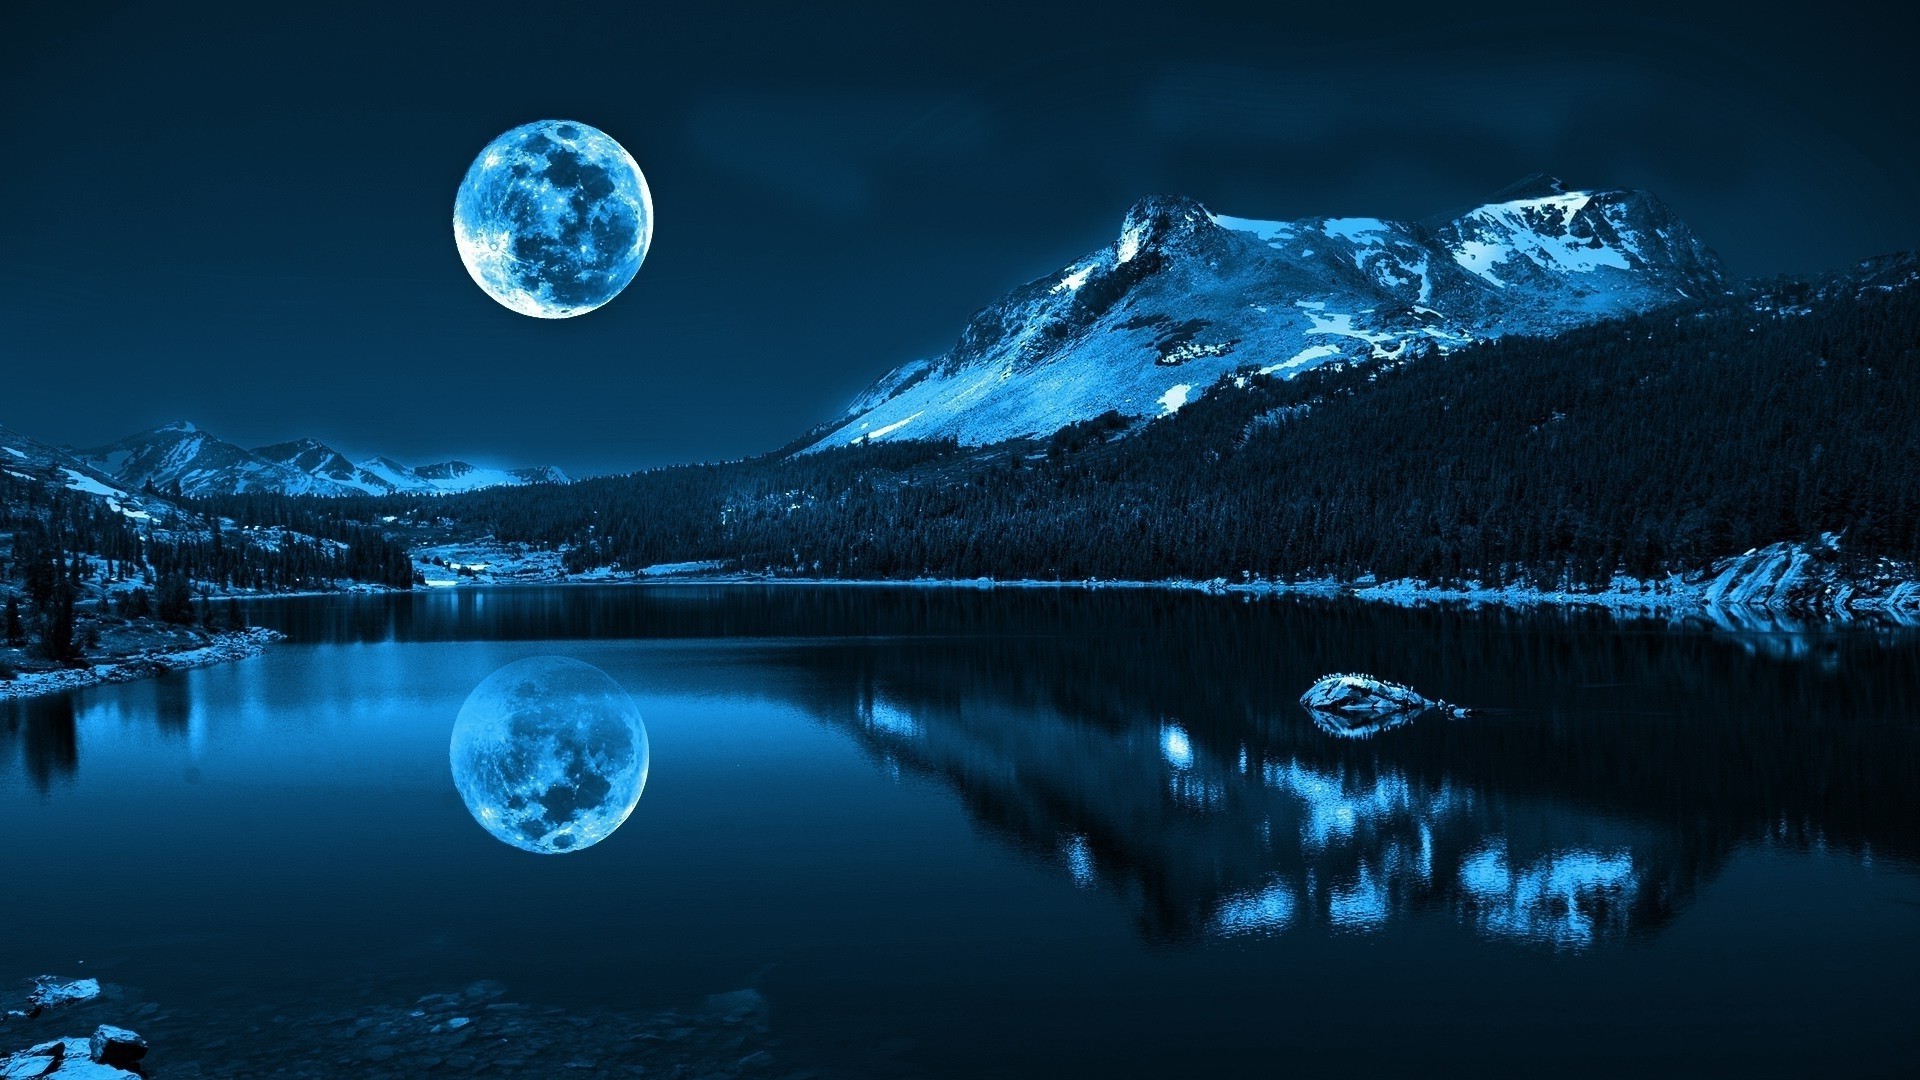 moonlight, Moon, Water, Lake, Pond, Mountain, Nature, Landscape, Trees, Forest, Winter, Blue Wallpaper